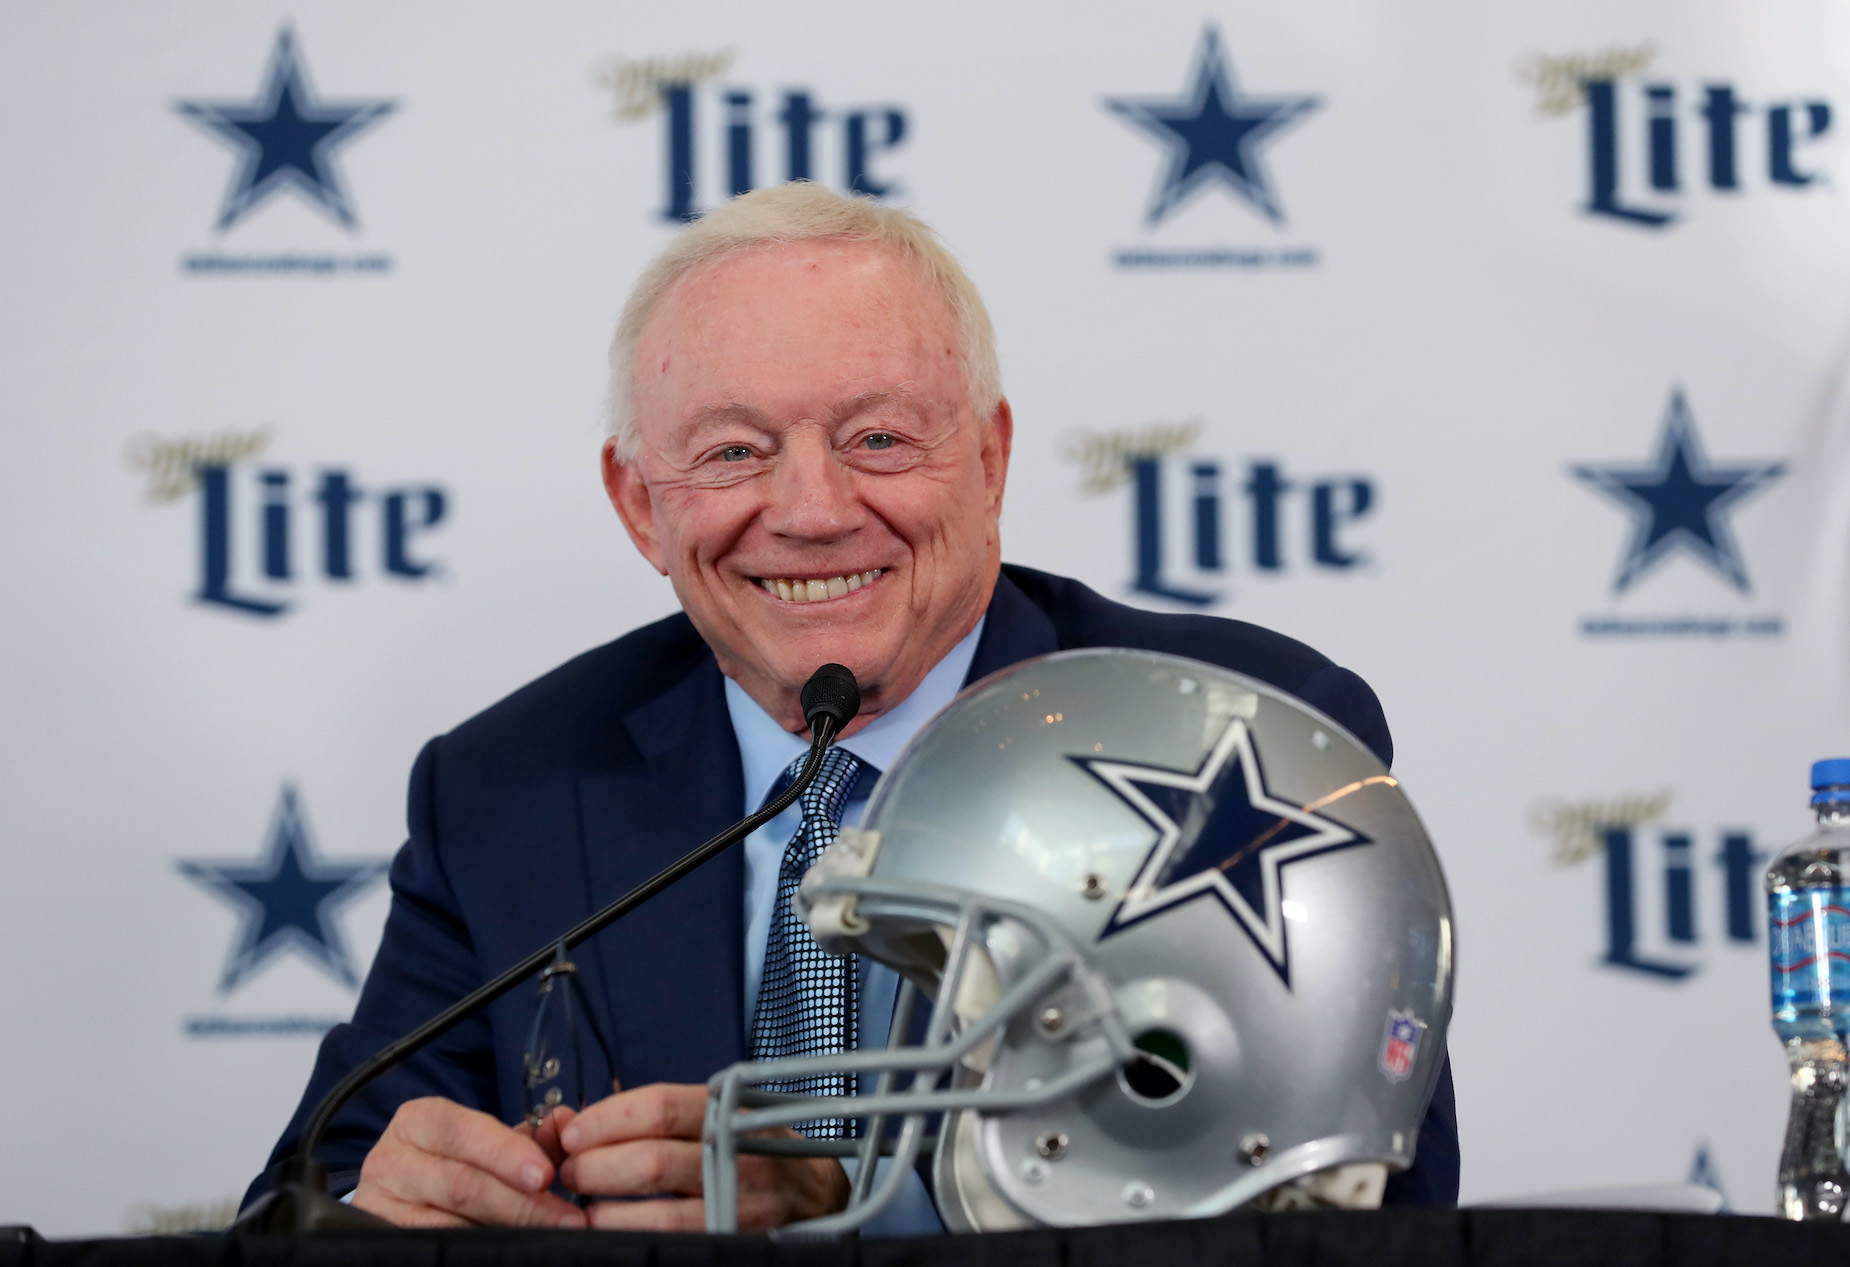 Dallas Cowboys owner Jerry Jones during a press conference